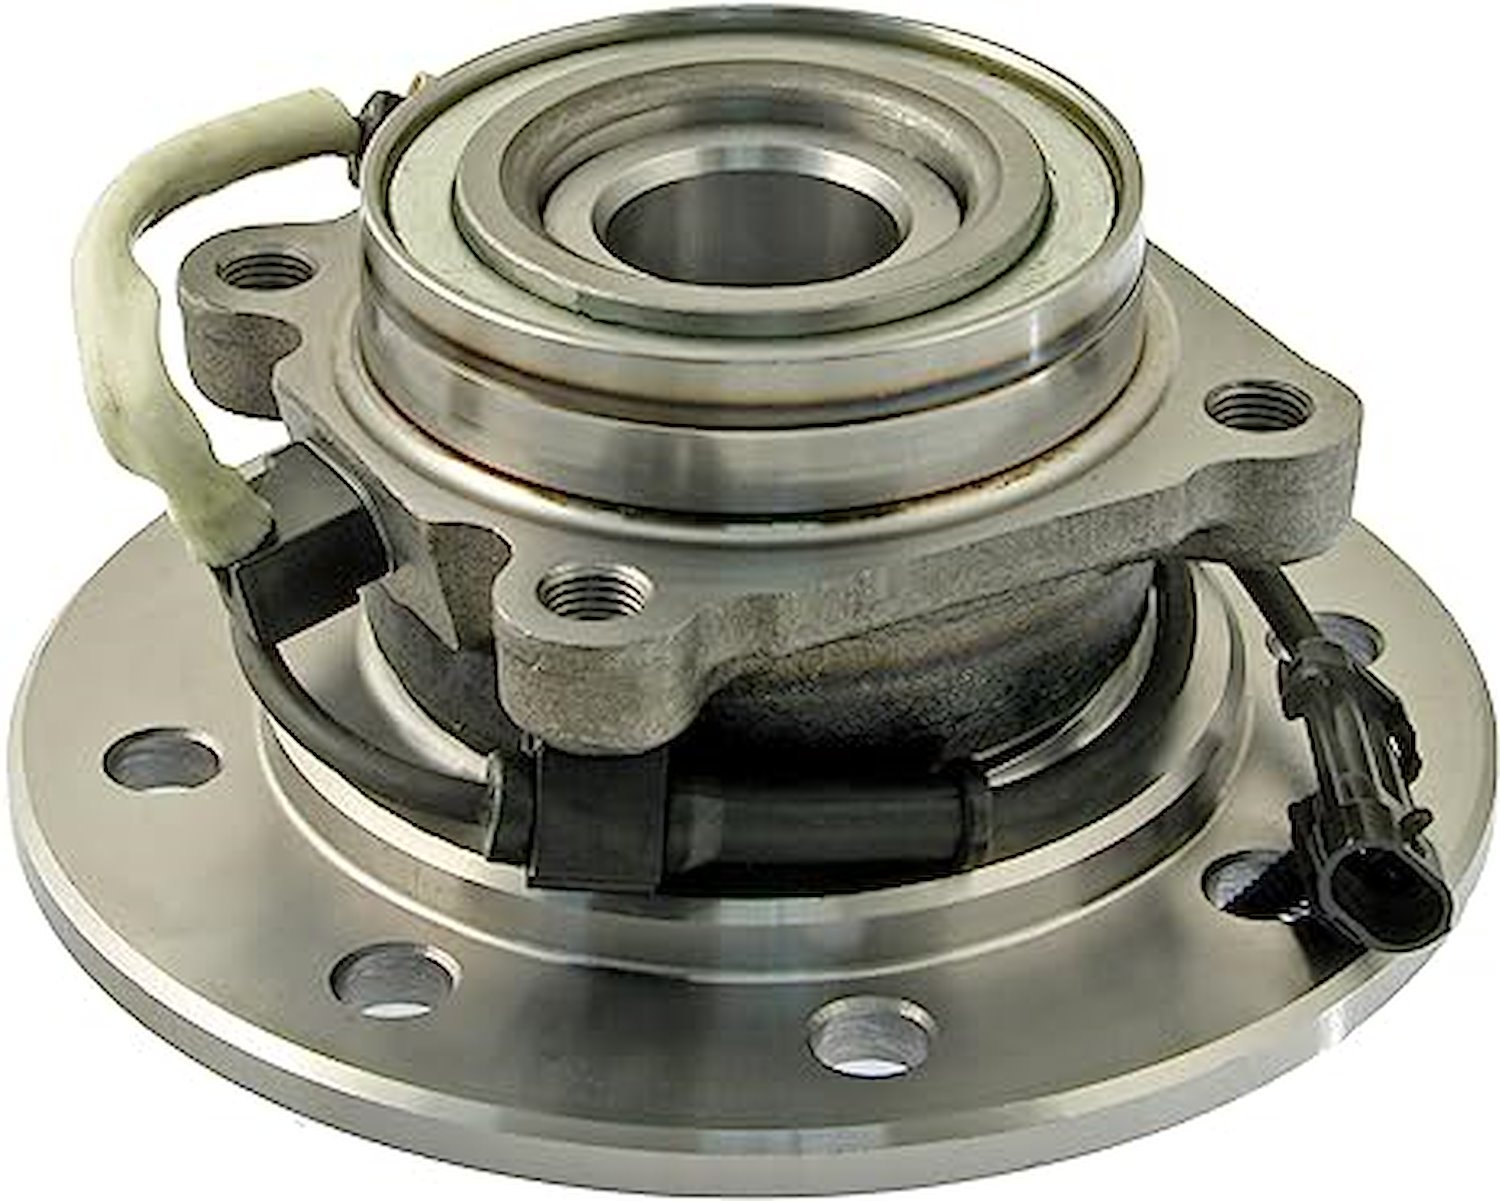 515041 Front Wheel Hub and Bearing Assembly for Select 1995-2000 Chevrolet and GMC Trucks with 8-Bolt Wheels